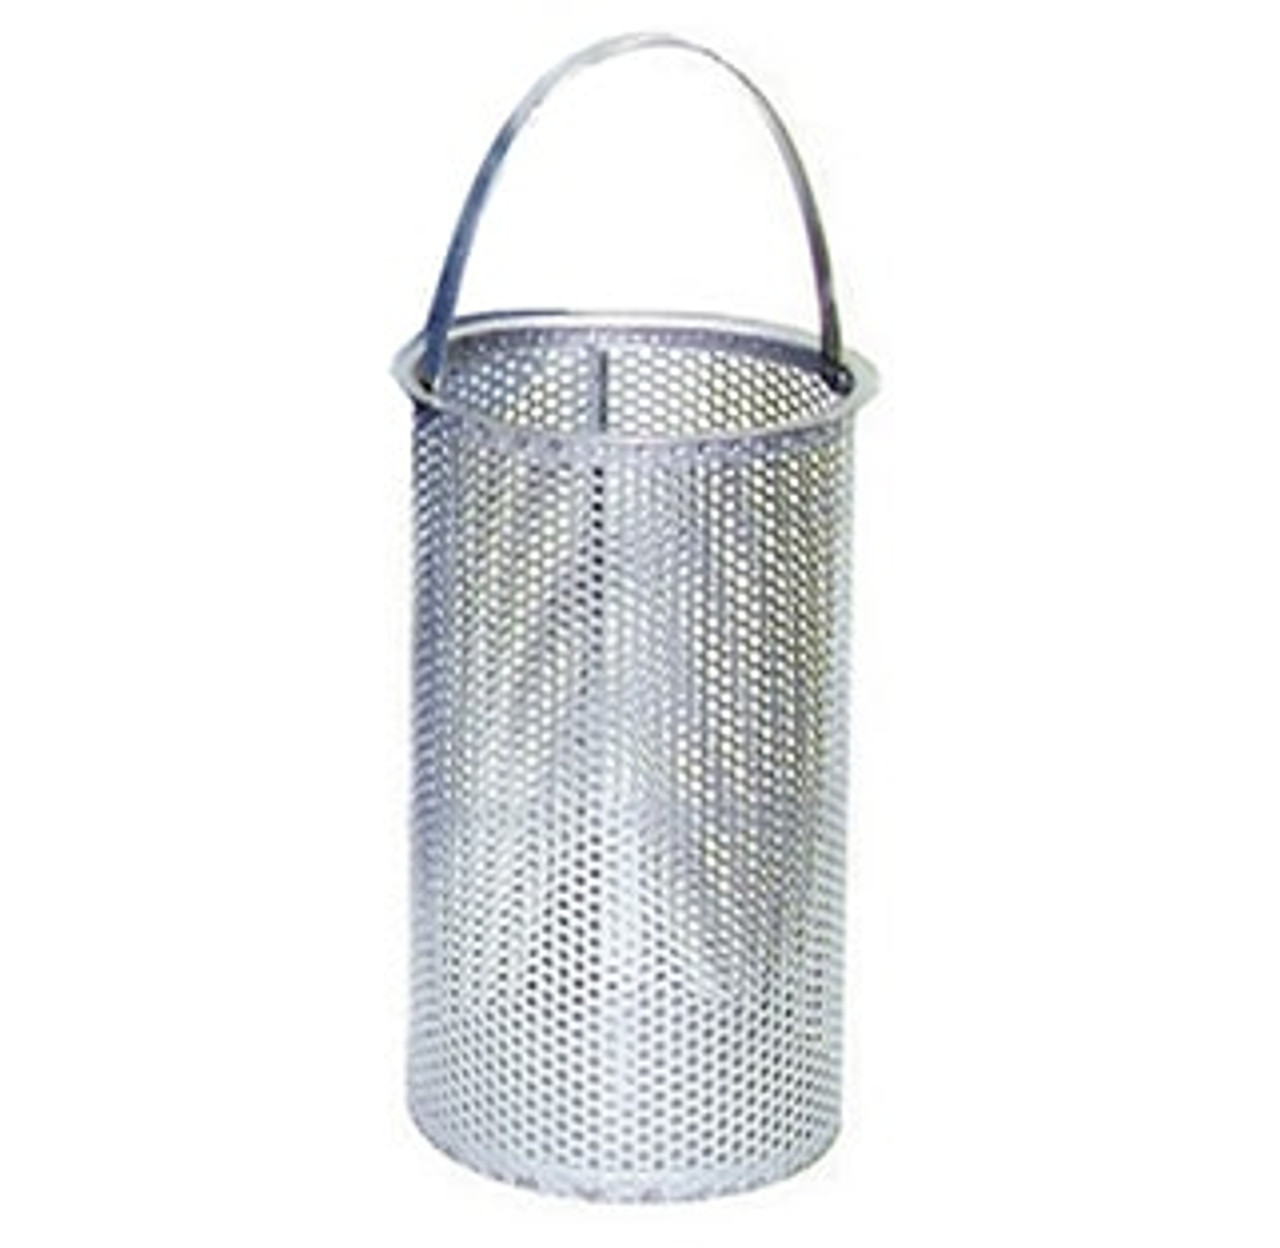 1/2" Perforated Replacement Basket for Eaton Model 72 Strainer Sizes 1-1/4"